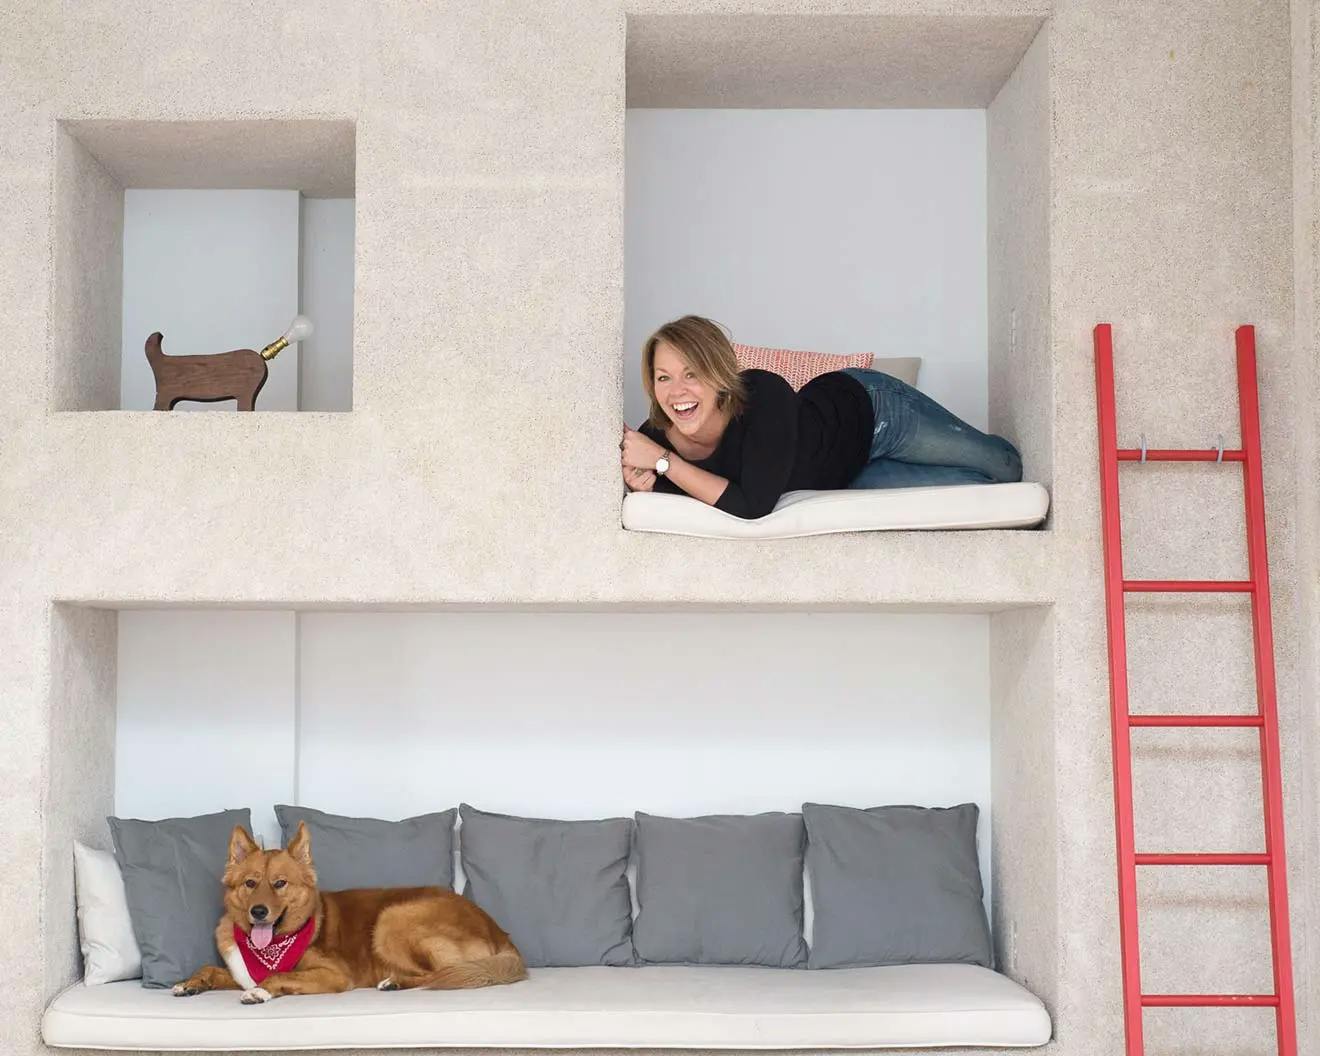 Artist Christina Watka laying in an alcove above another alcove with a dog with a red bandana.